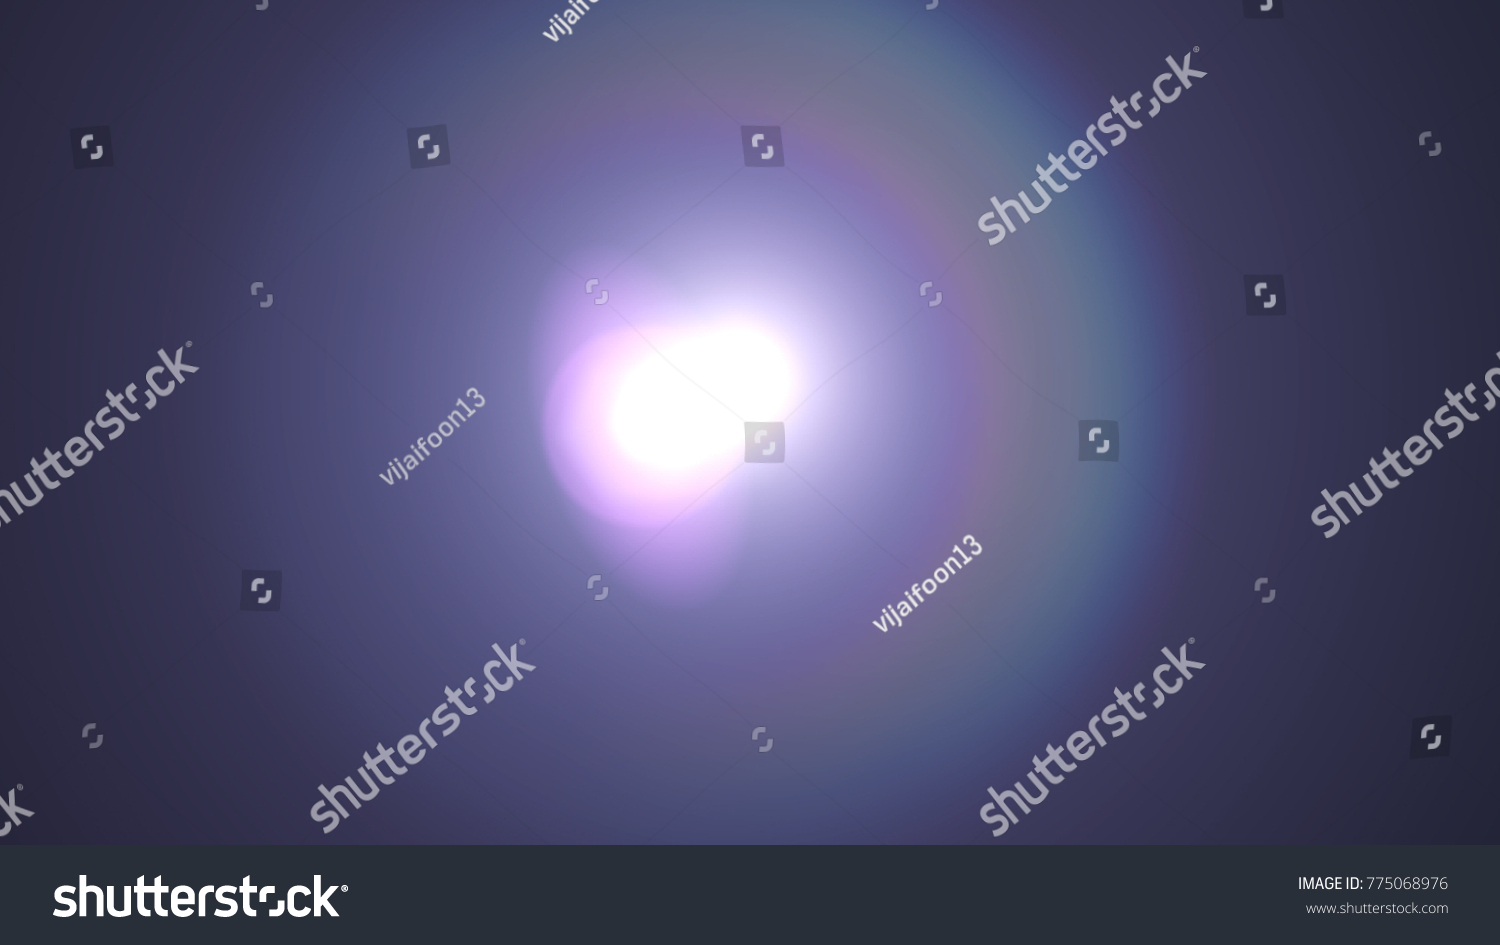 Digital Natural lens flare , Abstract overlays background. #775068976